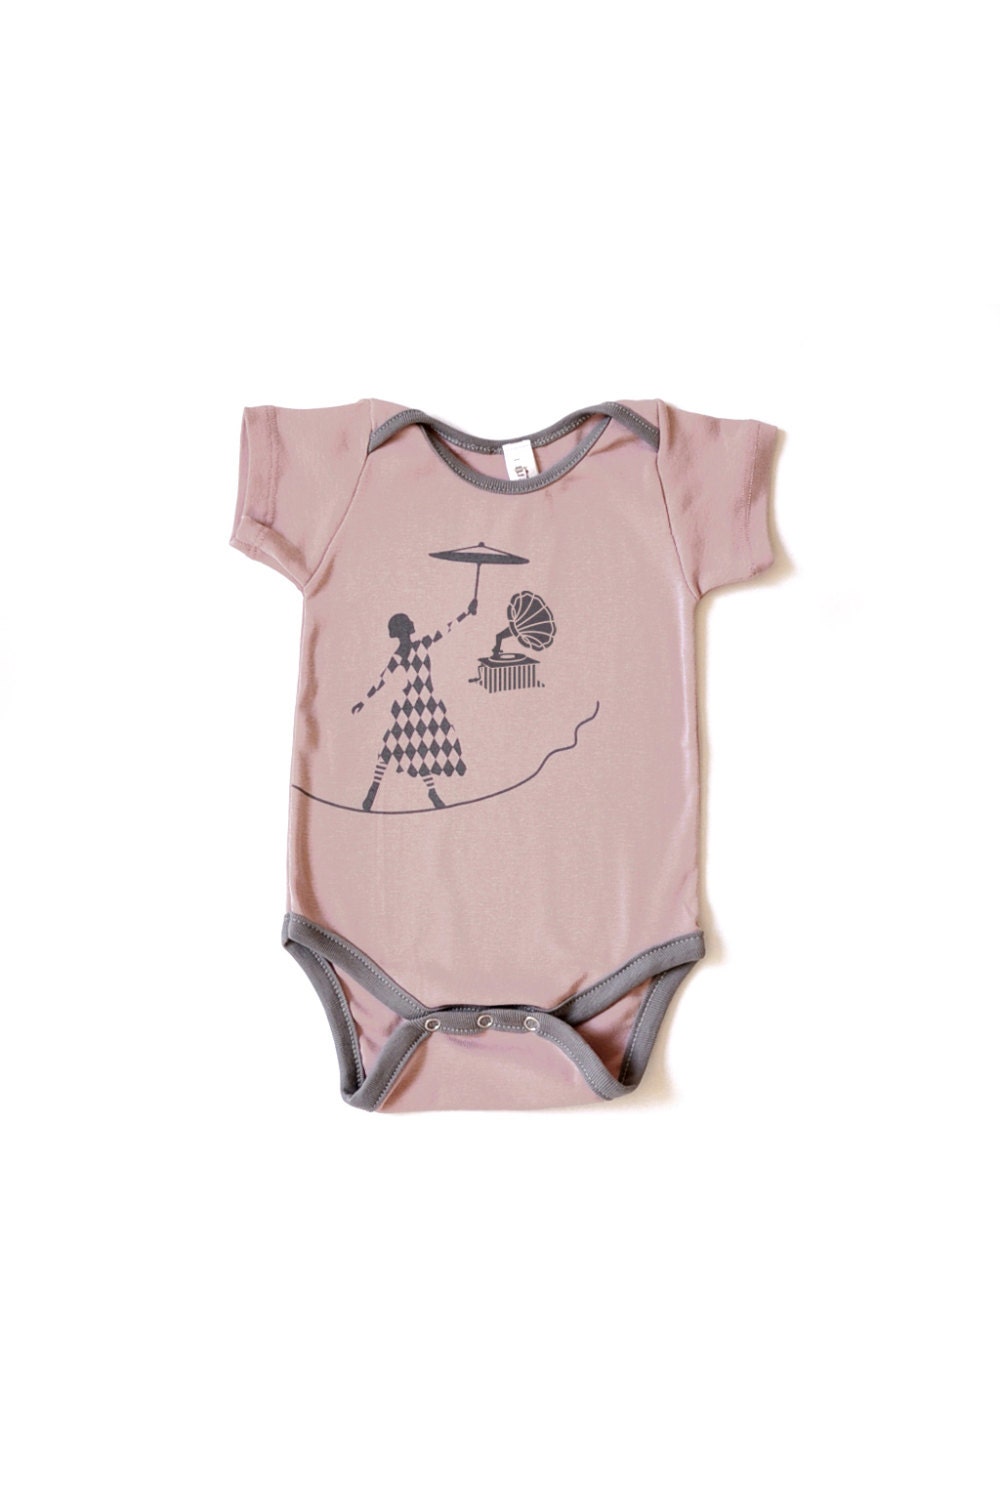 Baby Girl Clothes Organic Baby Clothes Baby Girl Romper